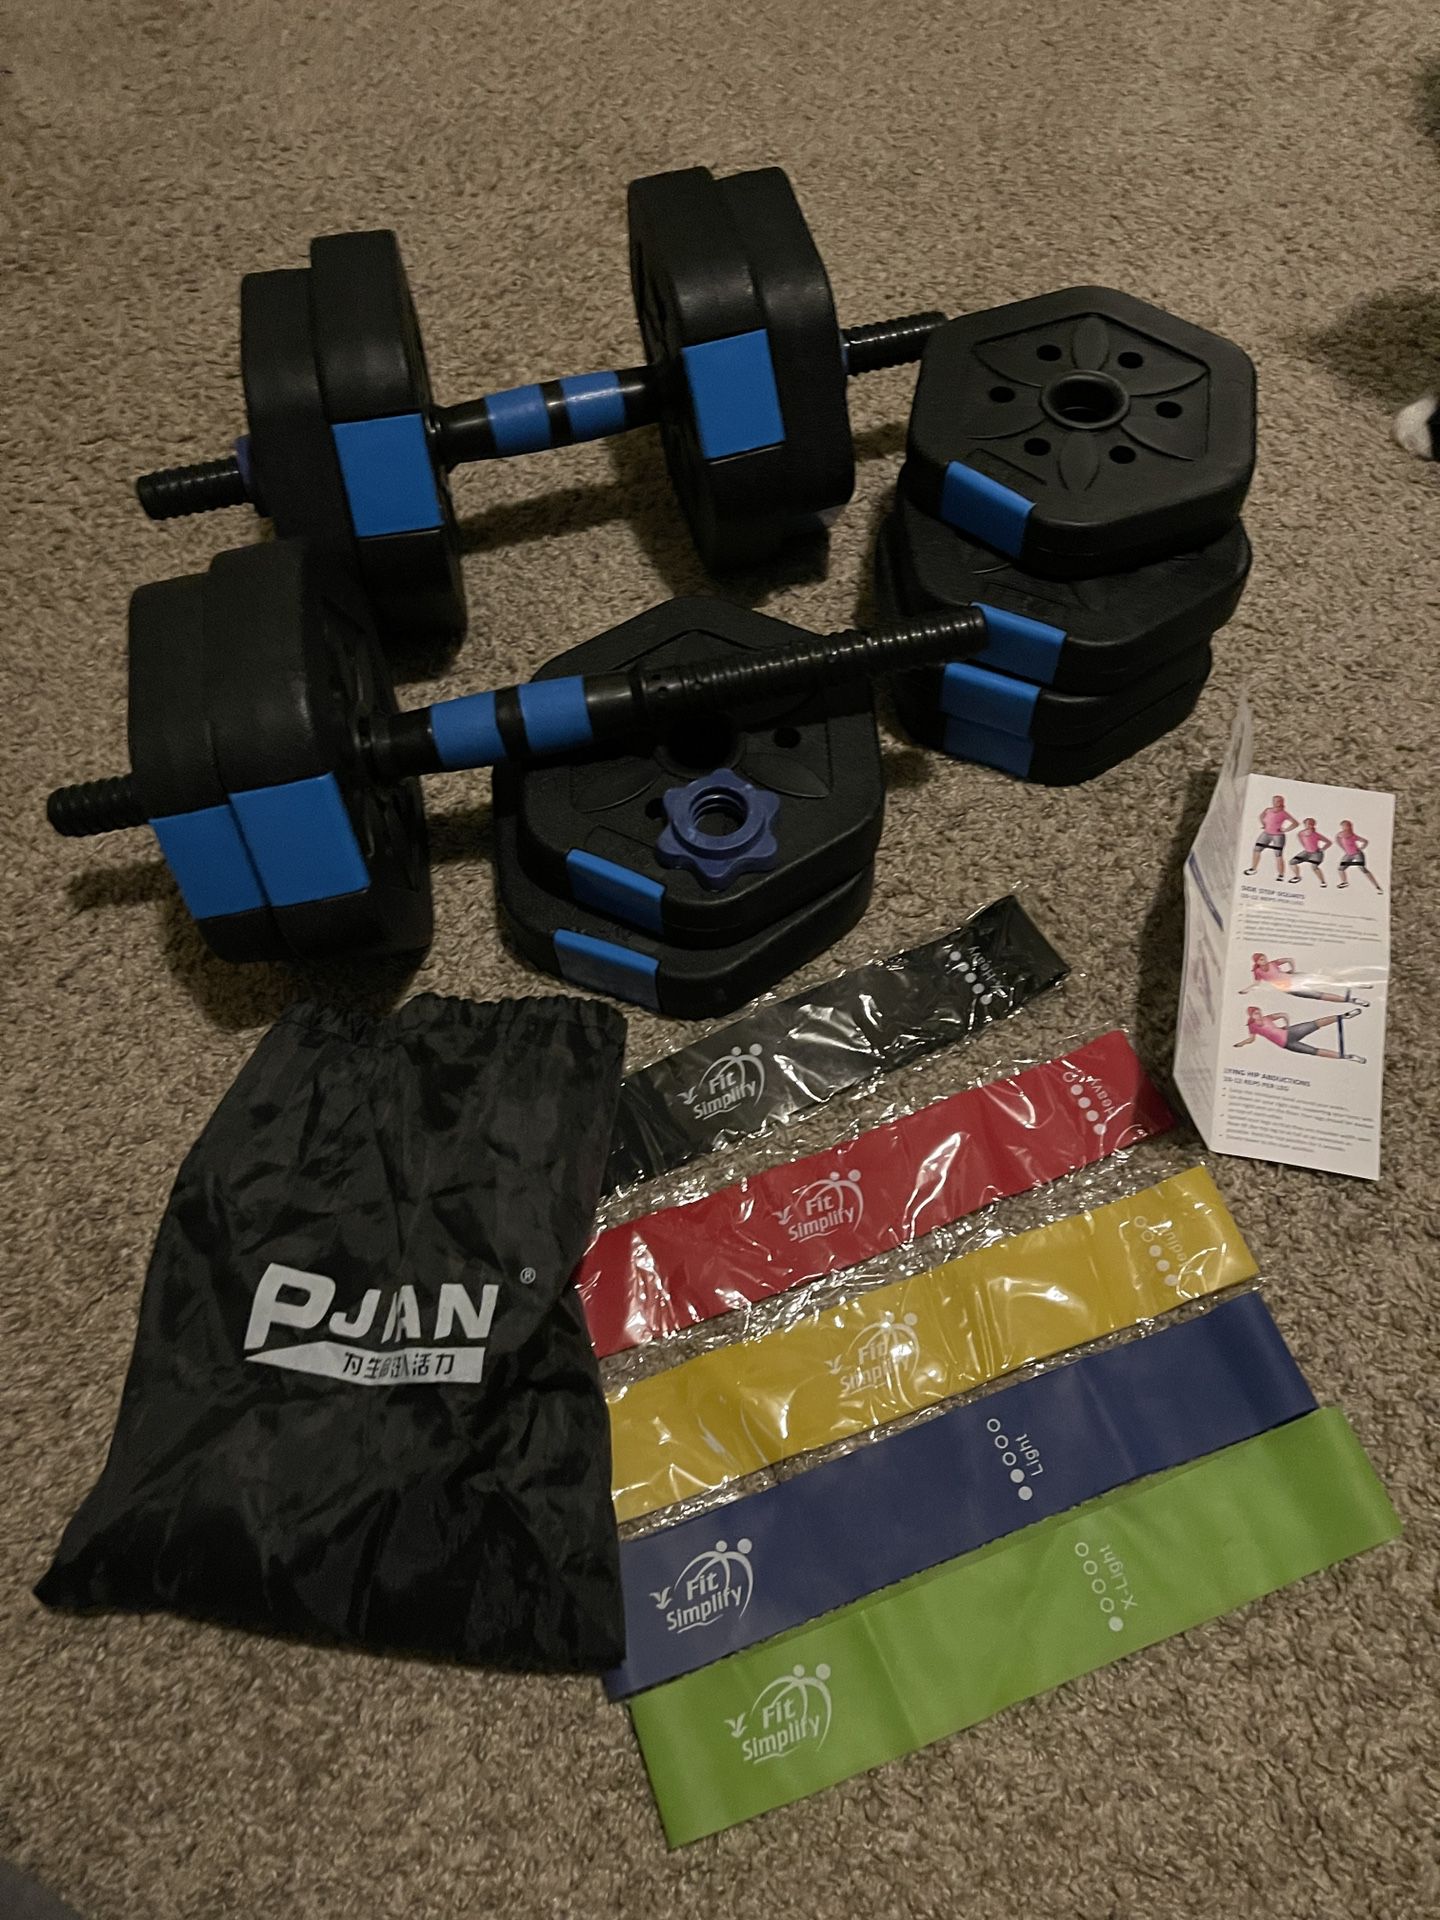 Exercise Equipment - Weights And Bands